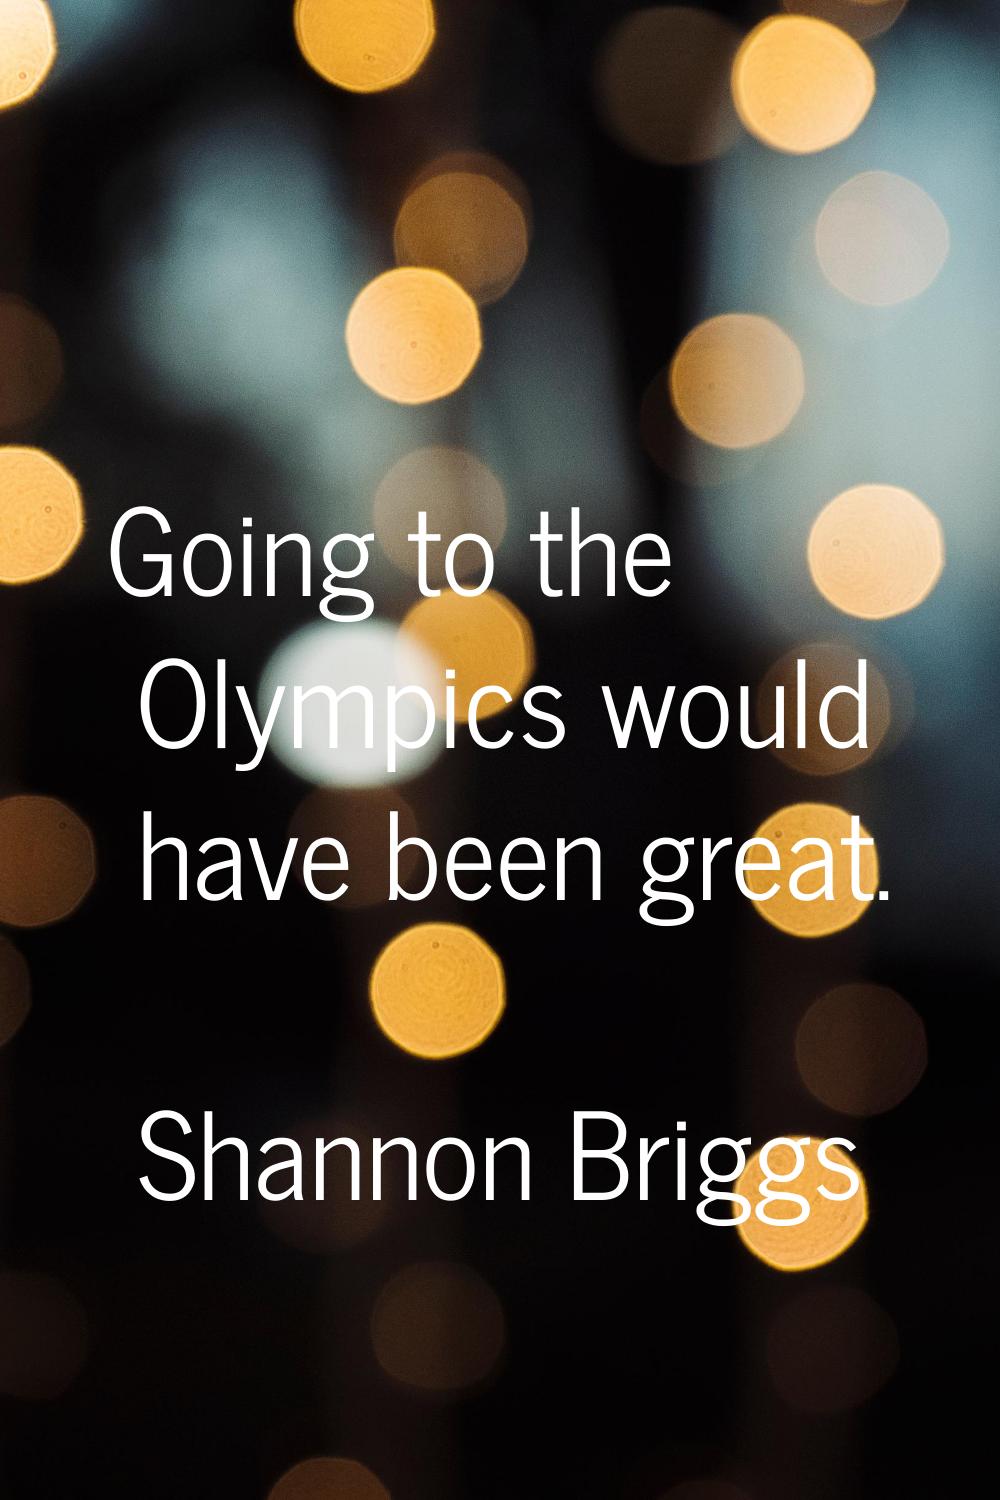 Going to the Olympics would have been great.